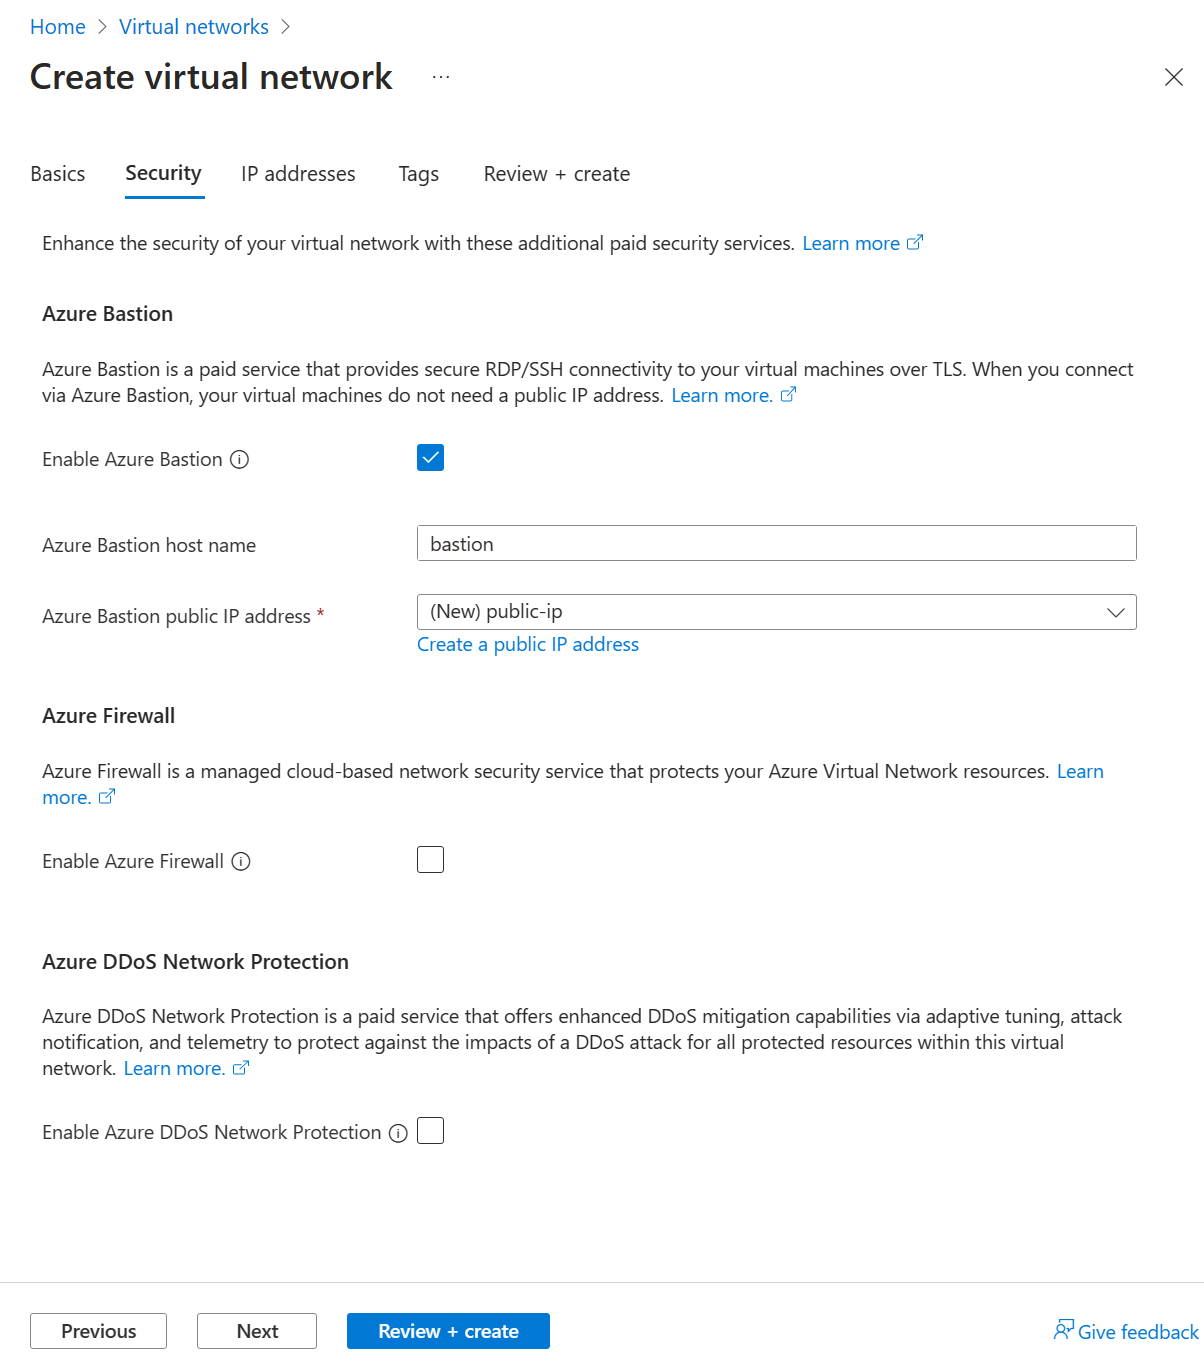 Screenshot of options for enabling an Azure Bastion host as part of creating a virtual network in the Azure portal.